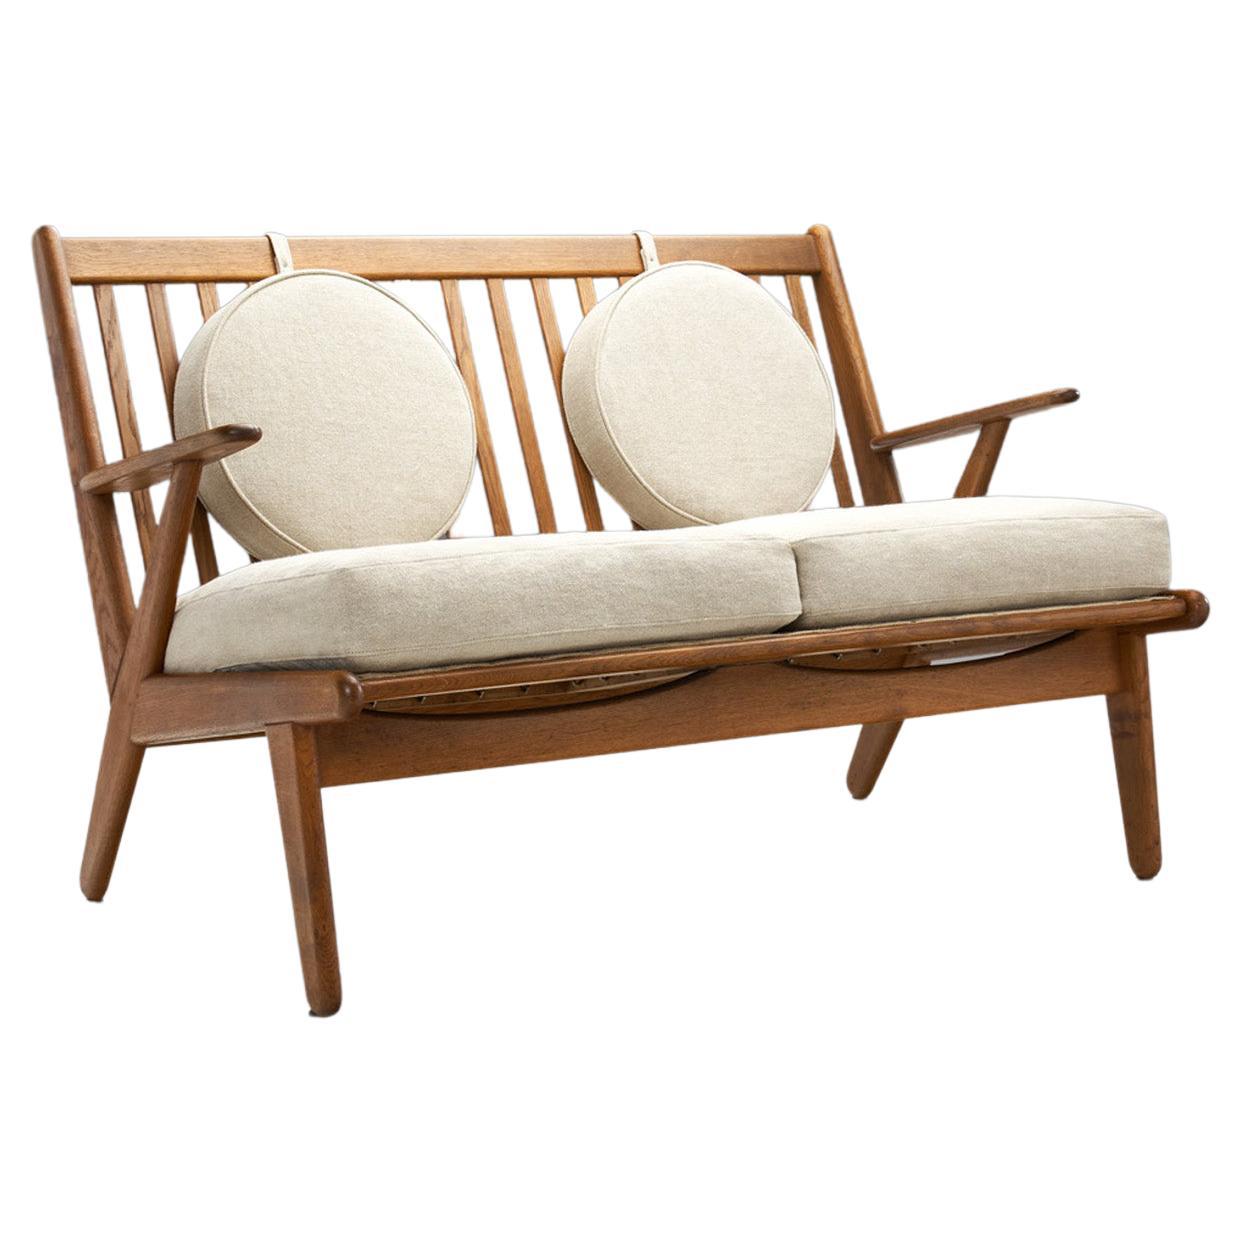 Danish Oak Two-Seater Bench with Pillows, Denmark ca. 1950s